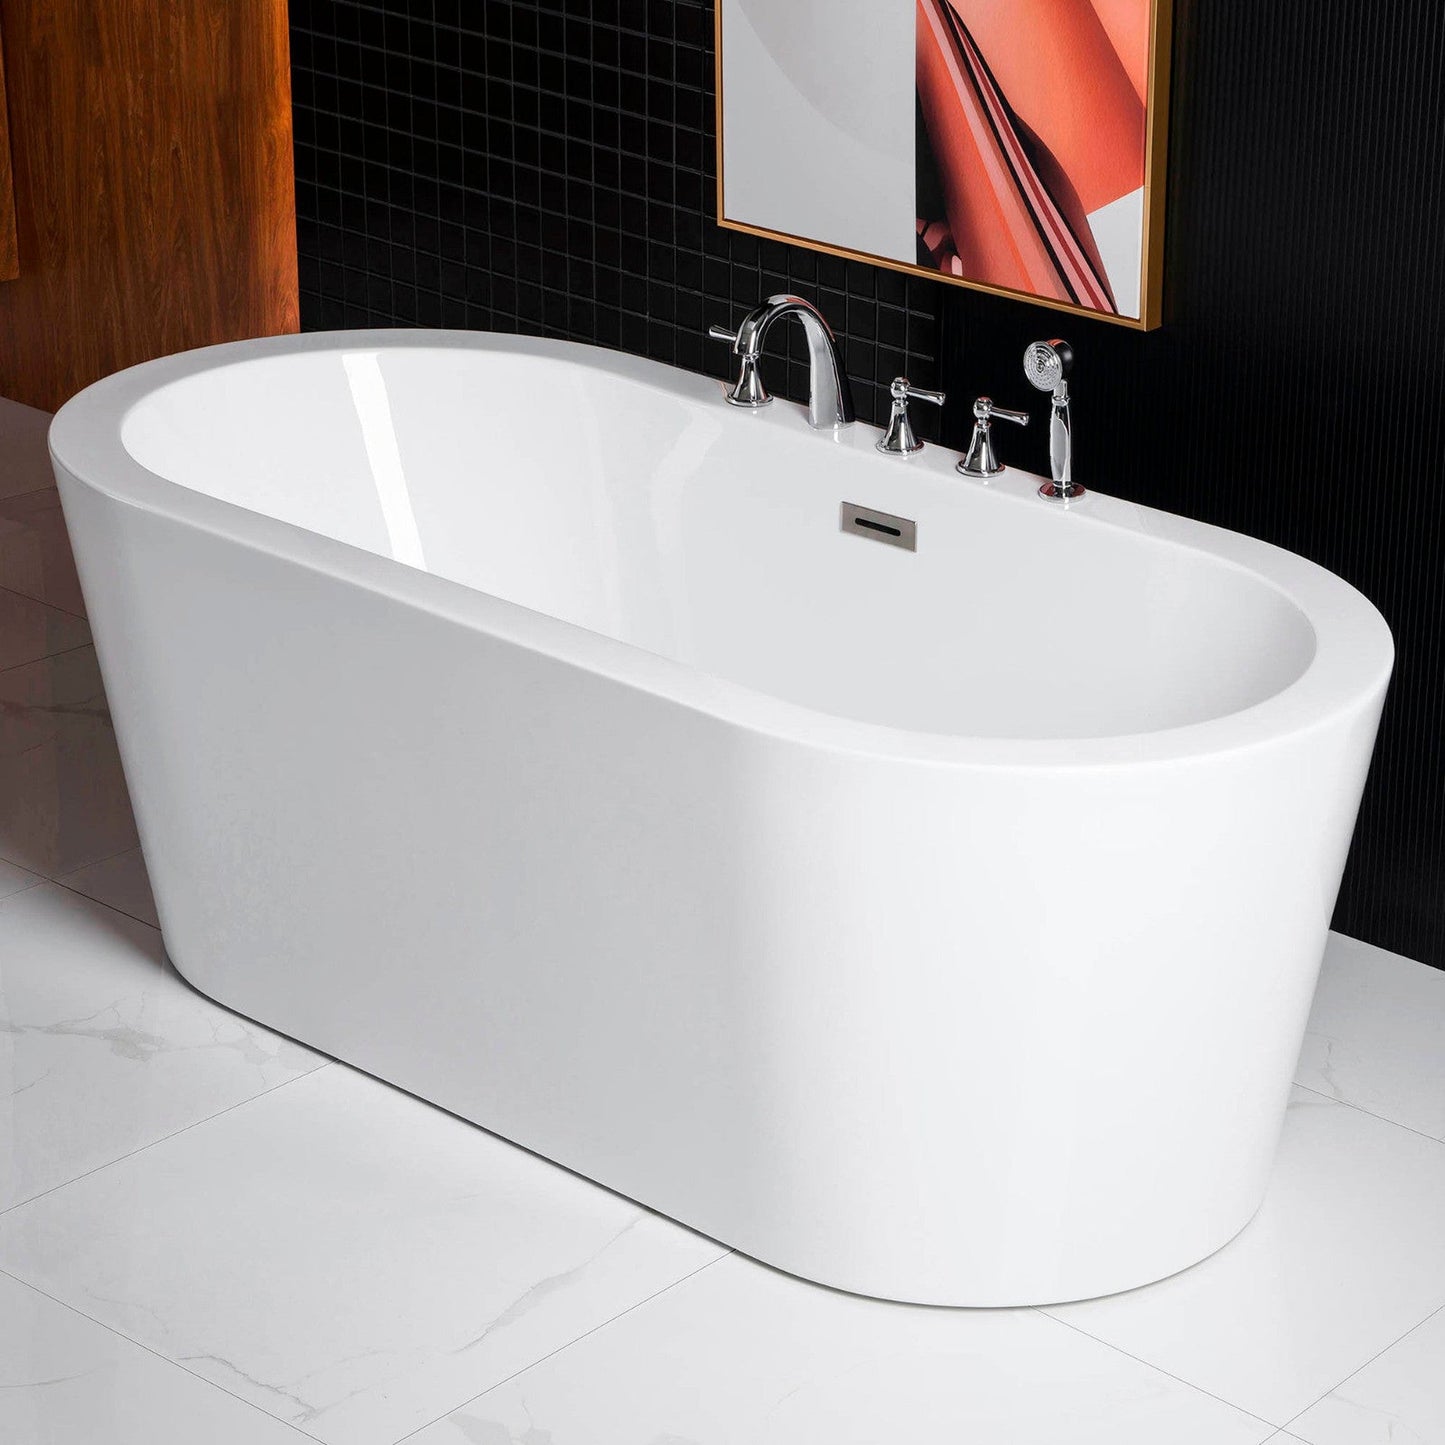 WoodBridge B0012 59" White Acrylic Freestanding Soaking Bathtub With Brushed Nickel Drain, Overflow, F0022 Tub Filler and Caddy Tray